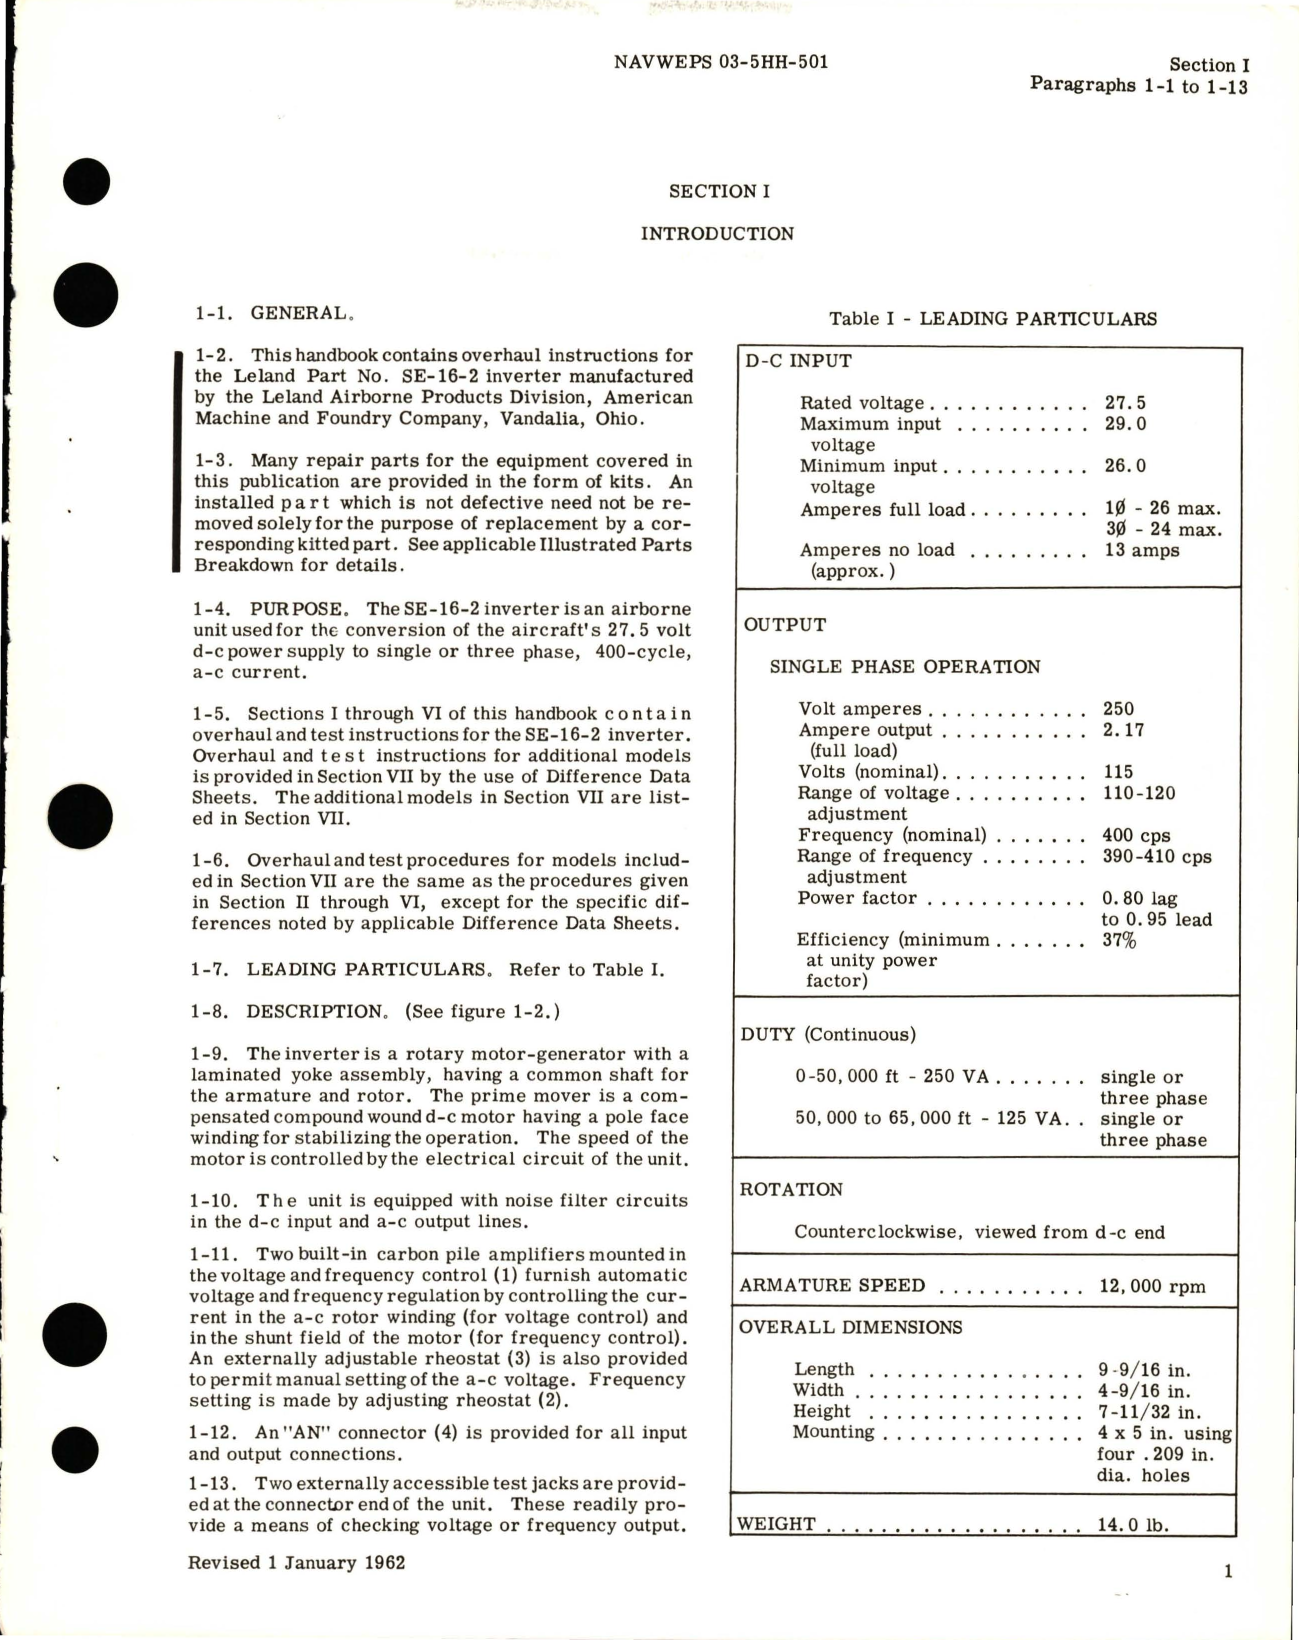 Sample page 5 from AirCorps Library document: Overhaul Instructions for Inverter - Part SE-16-2 and SE-16-3